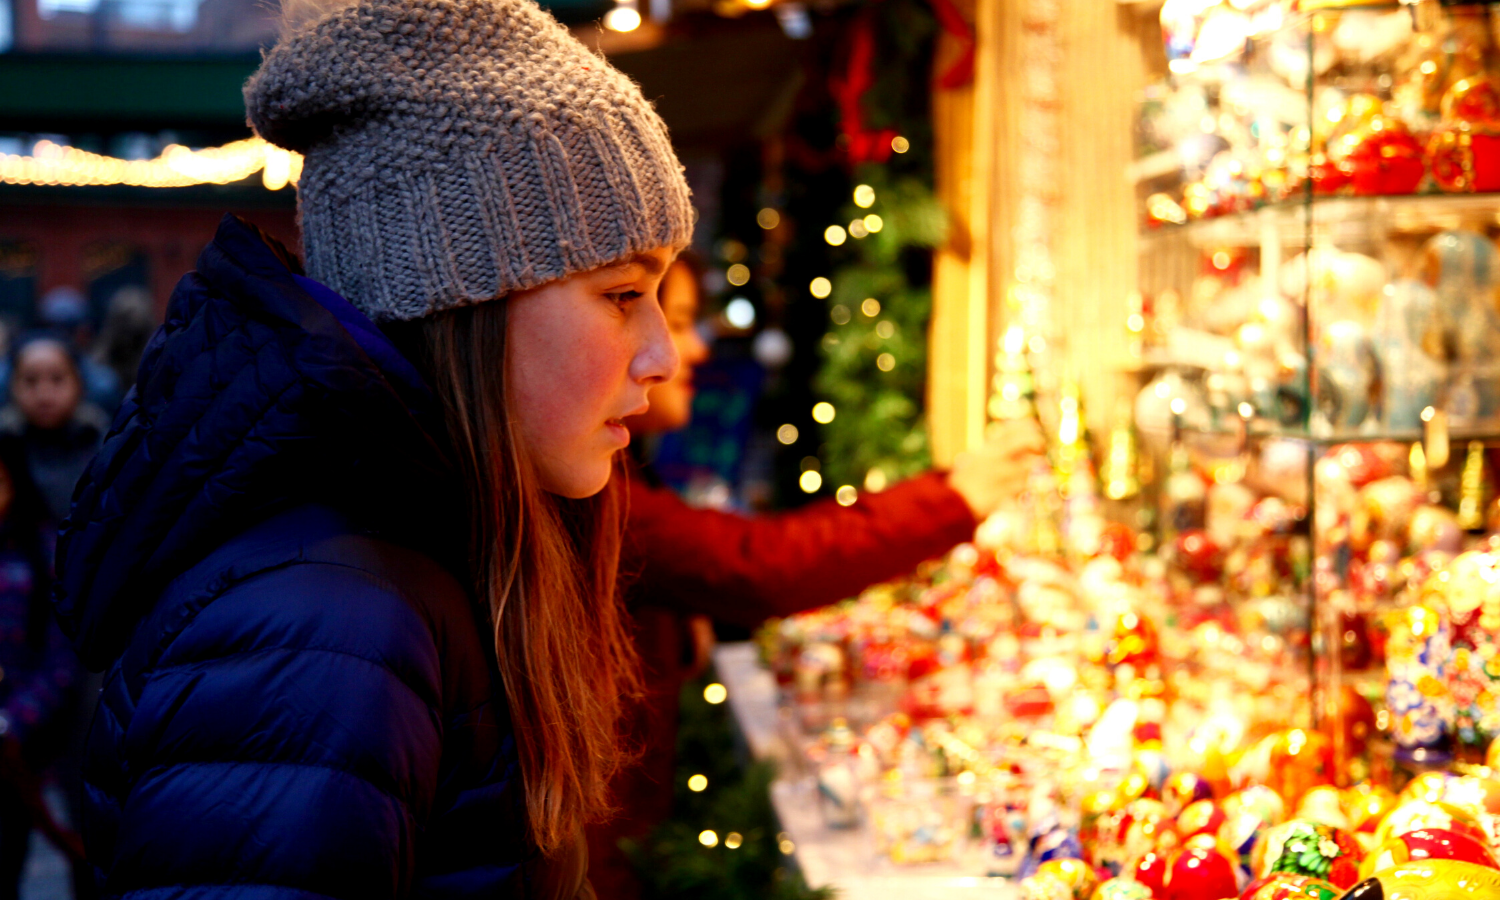 Picture of a teenage girl in a hat looking a variety of crafts in a stall. There are festive fairy lights and Christmas trees in the background. 